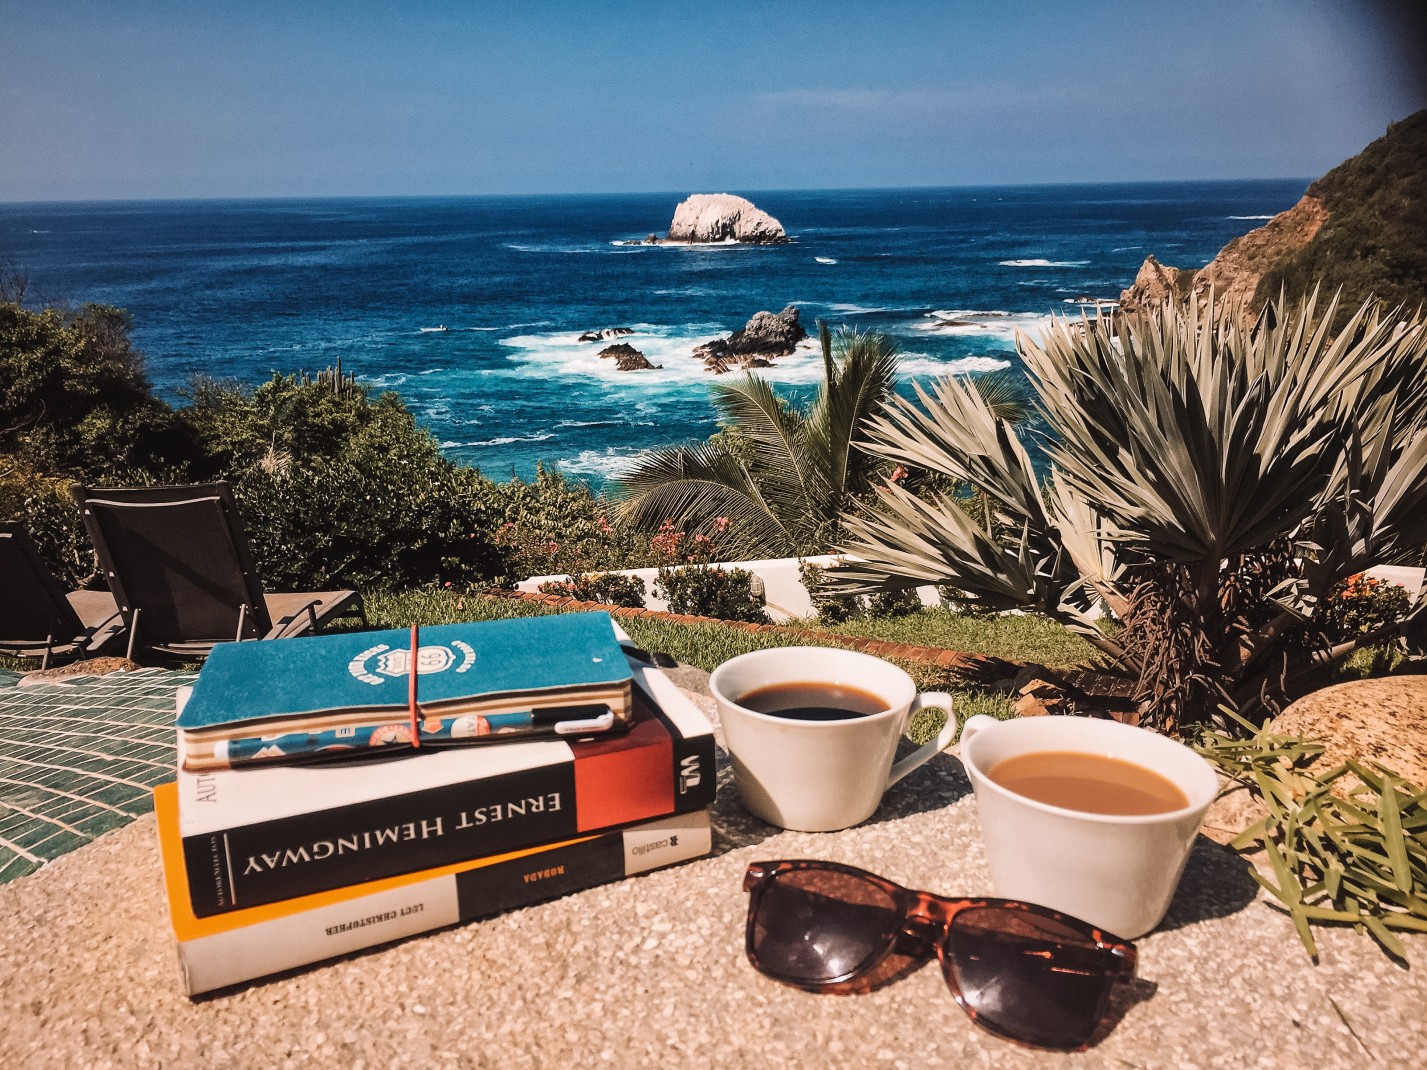 books and cups of coffee with the ocean in the background during daytime